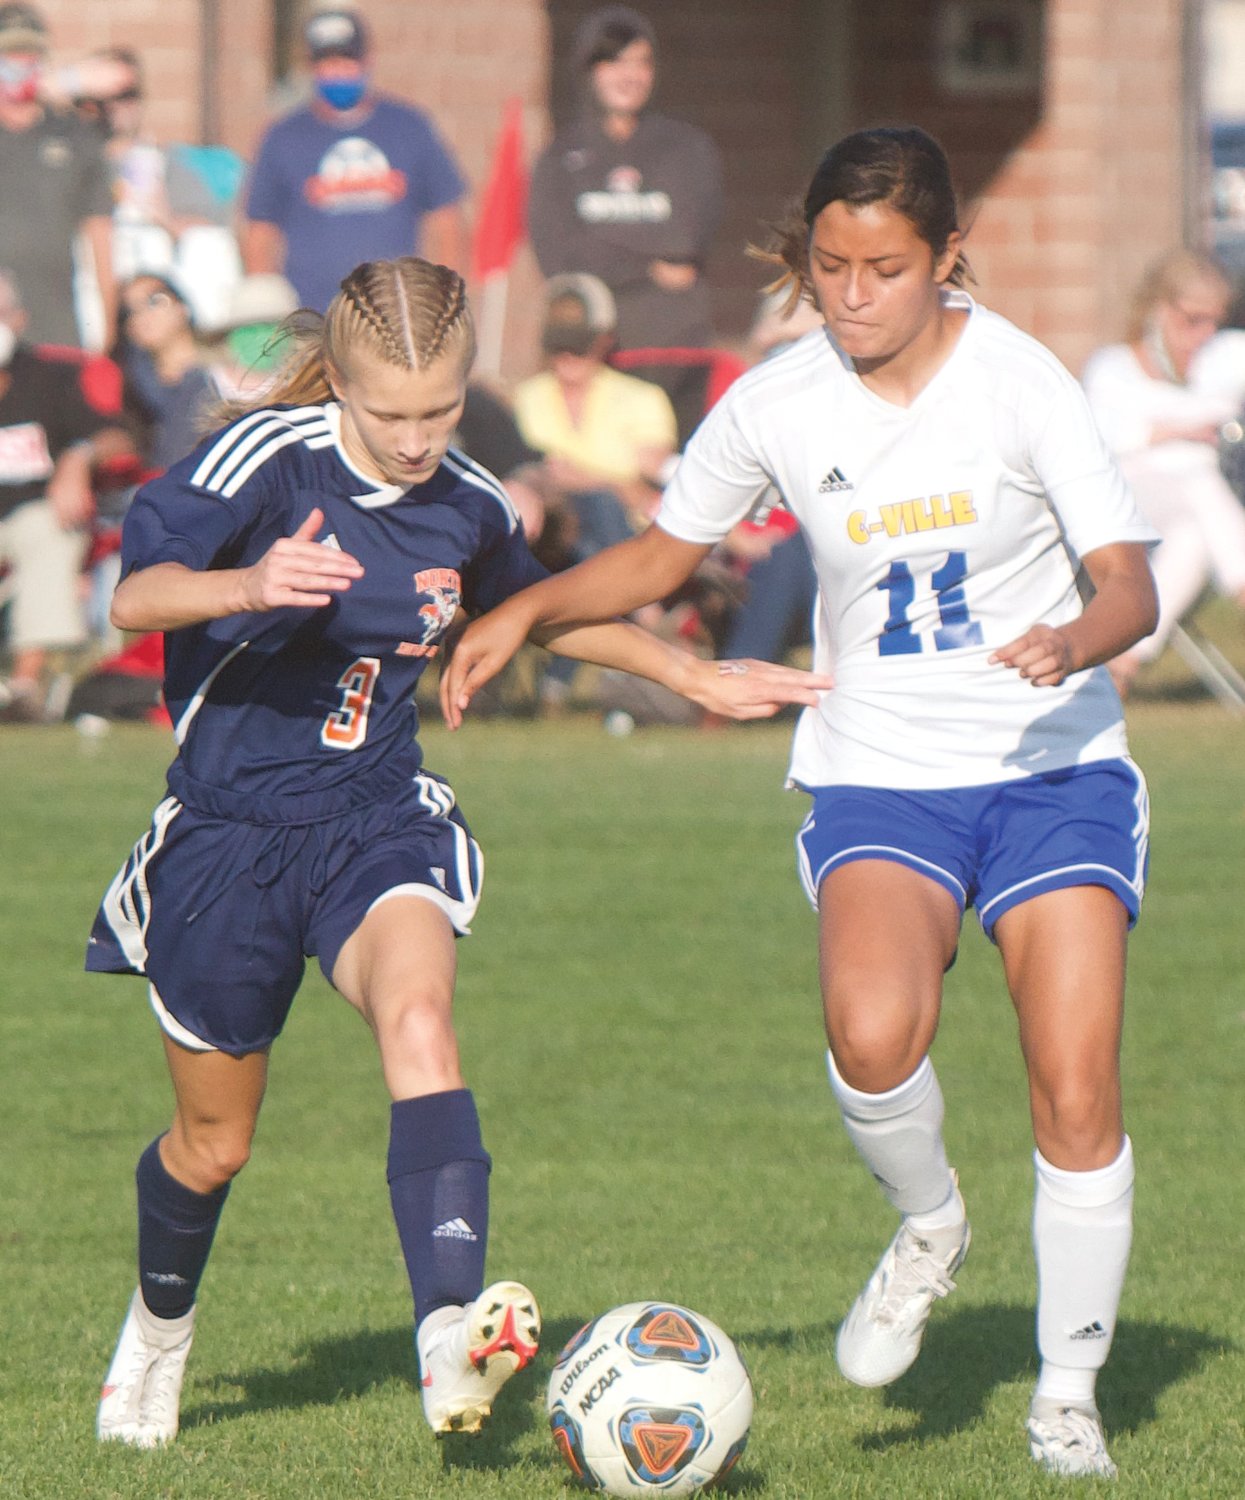 North Montgomery’s Caitlin Burns and Crawfordsville’s Giselle Rojas Jacome fight for position.